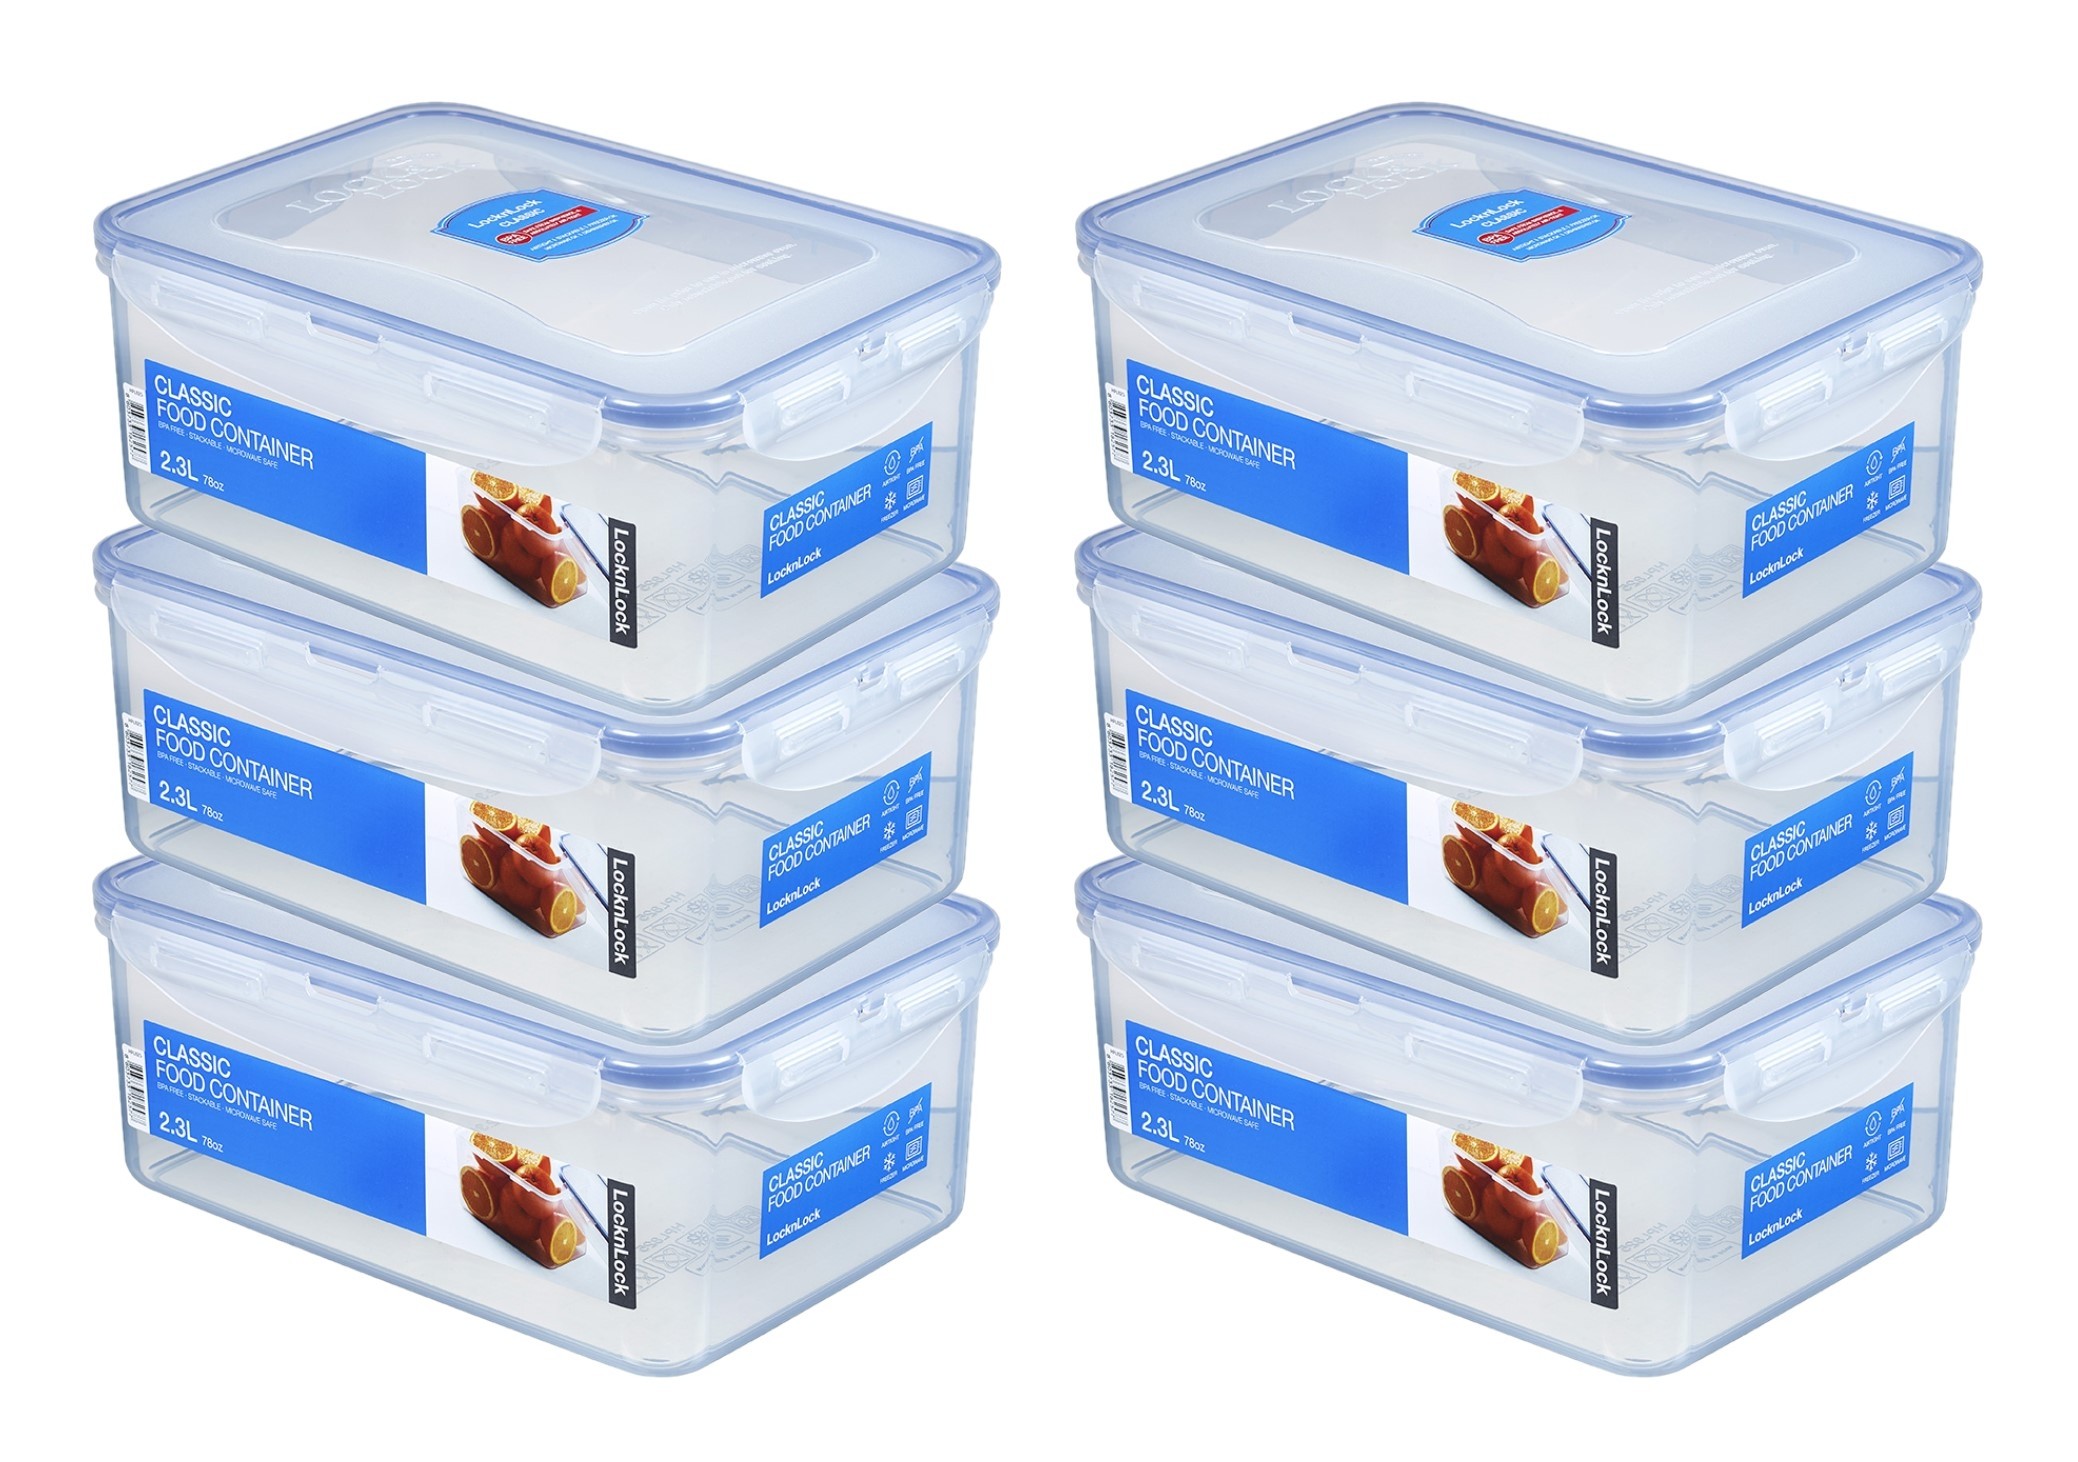 3 X Lock & Lock Rectangular Container 2.3 Litre HPL825 END OF LINE 2577 